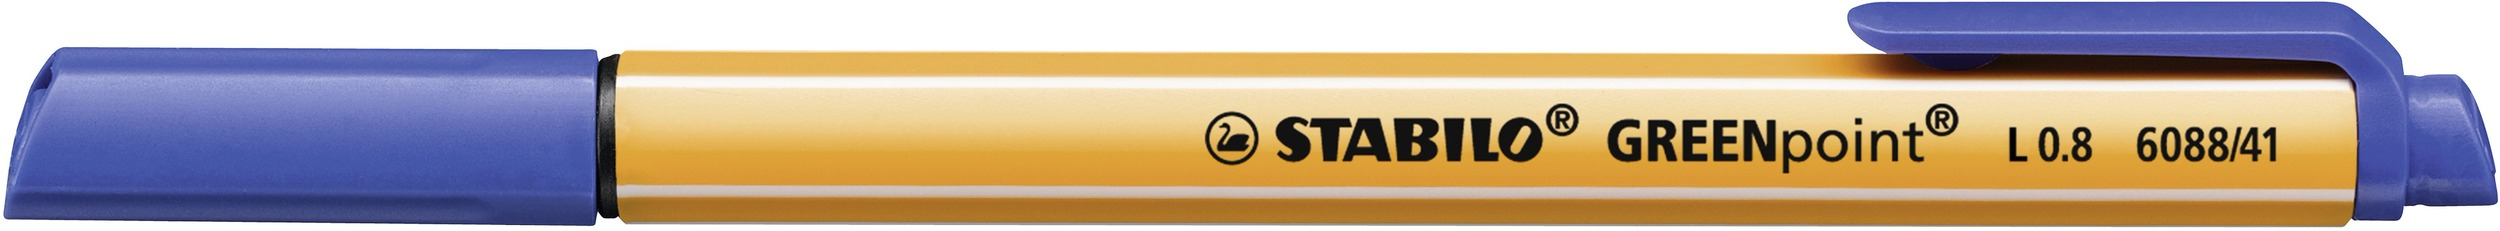 stabilo Stabilo Greenpoint Co2 Neutral Fibre Tip Sign Pen 0.8mm Line Blue (pack 10) 6088/41 6088/41 - AD01